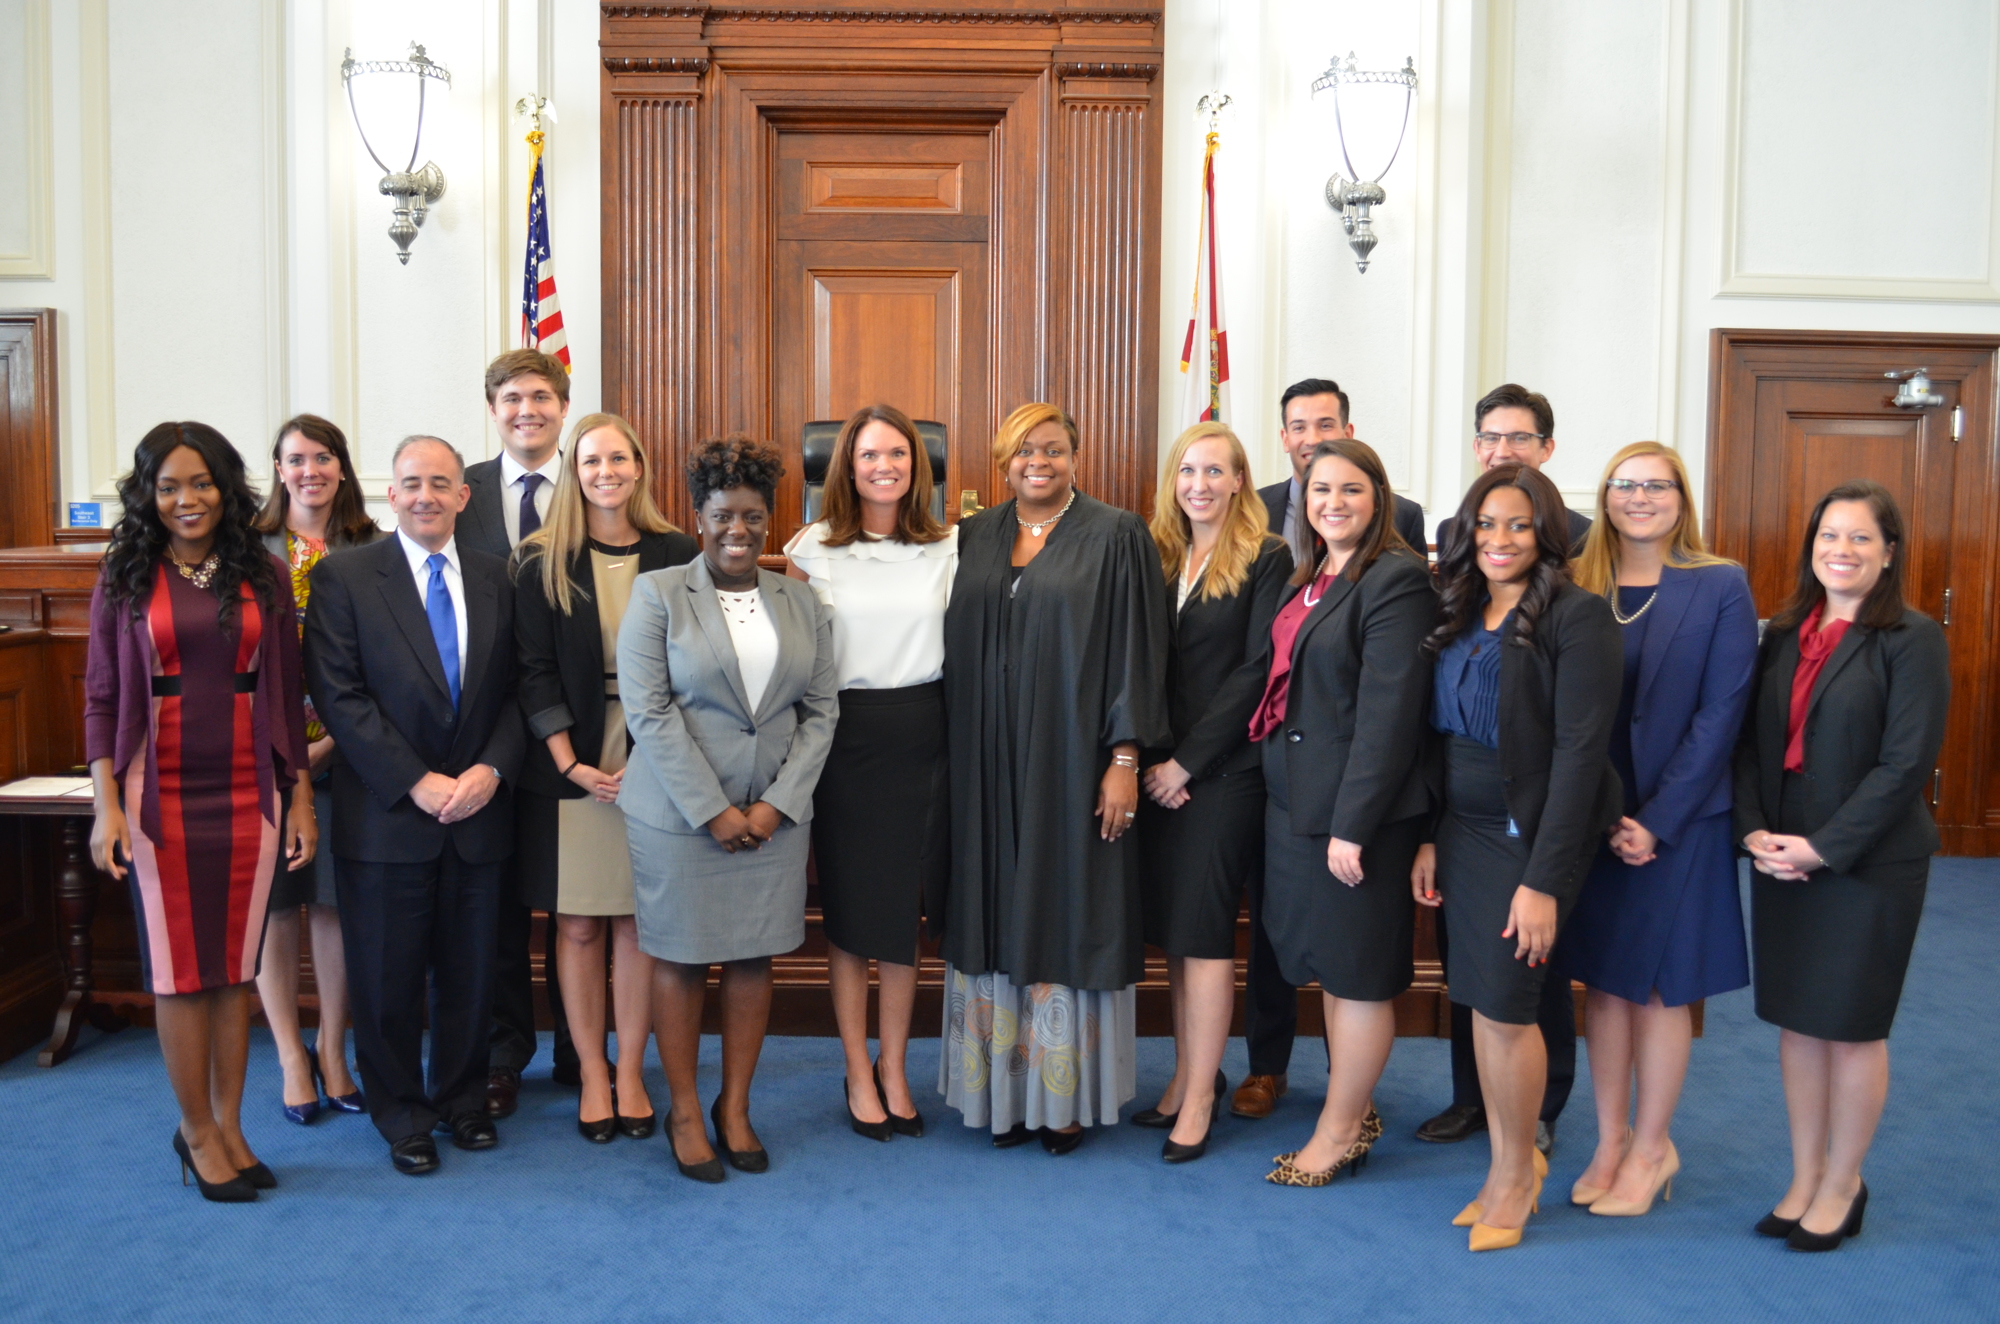 On Sept. 26, the new class of assistant state attorneys in the 4th Judicial Circuit was sworn in at a ceremony at the Ed Austin Building